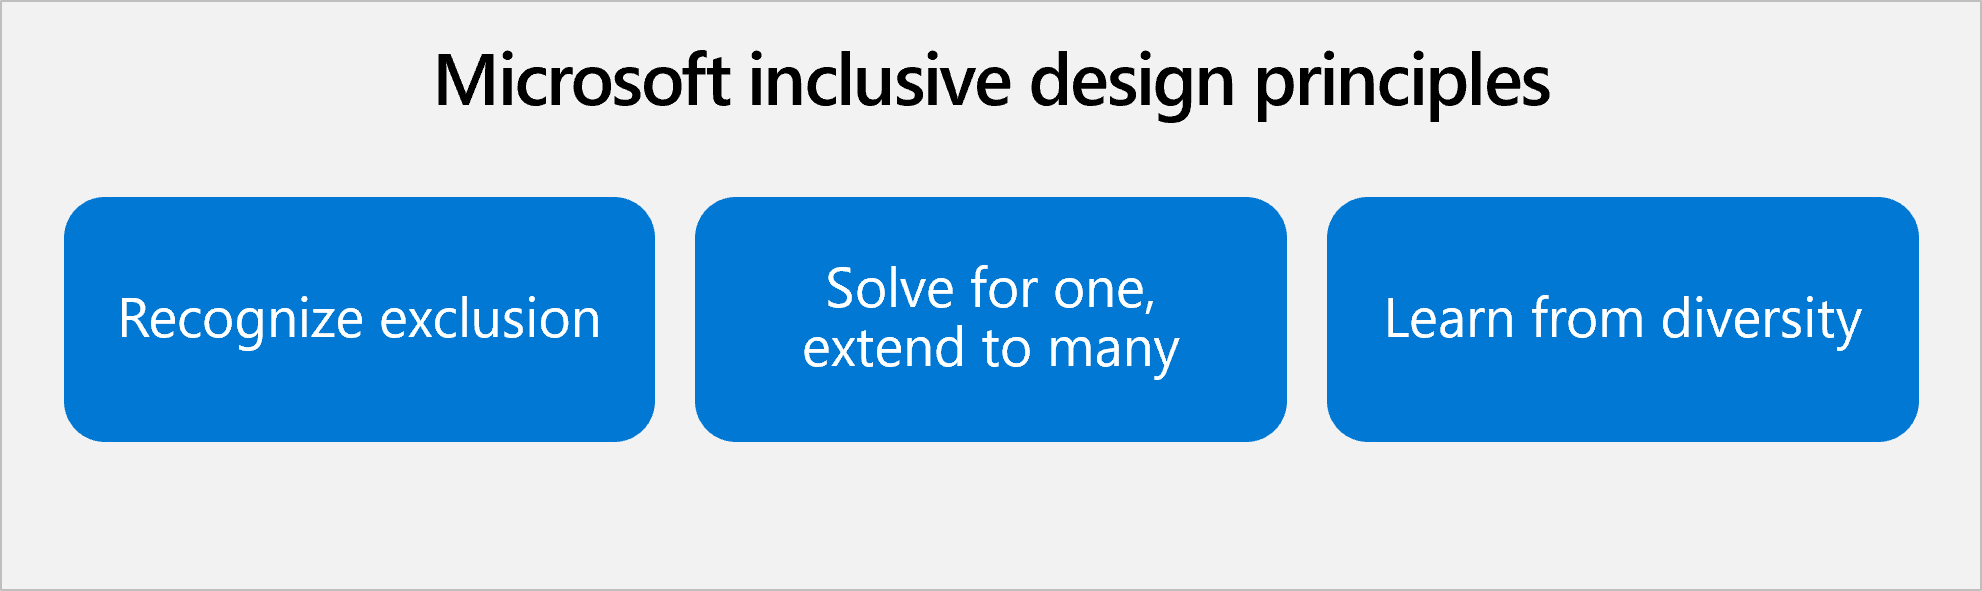 Diagram that shows inclusive design principles: recognize exclusion; solve for one, extend to many, and learn from diversity.